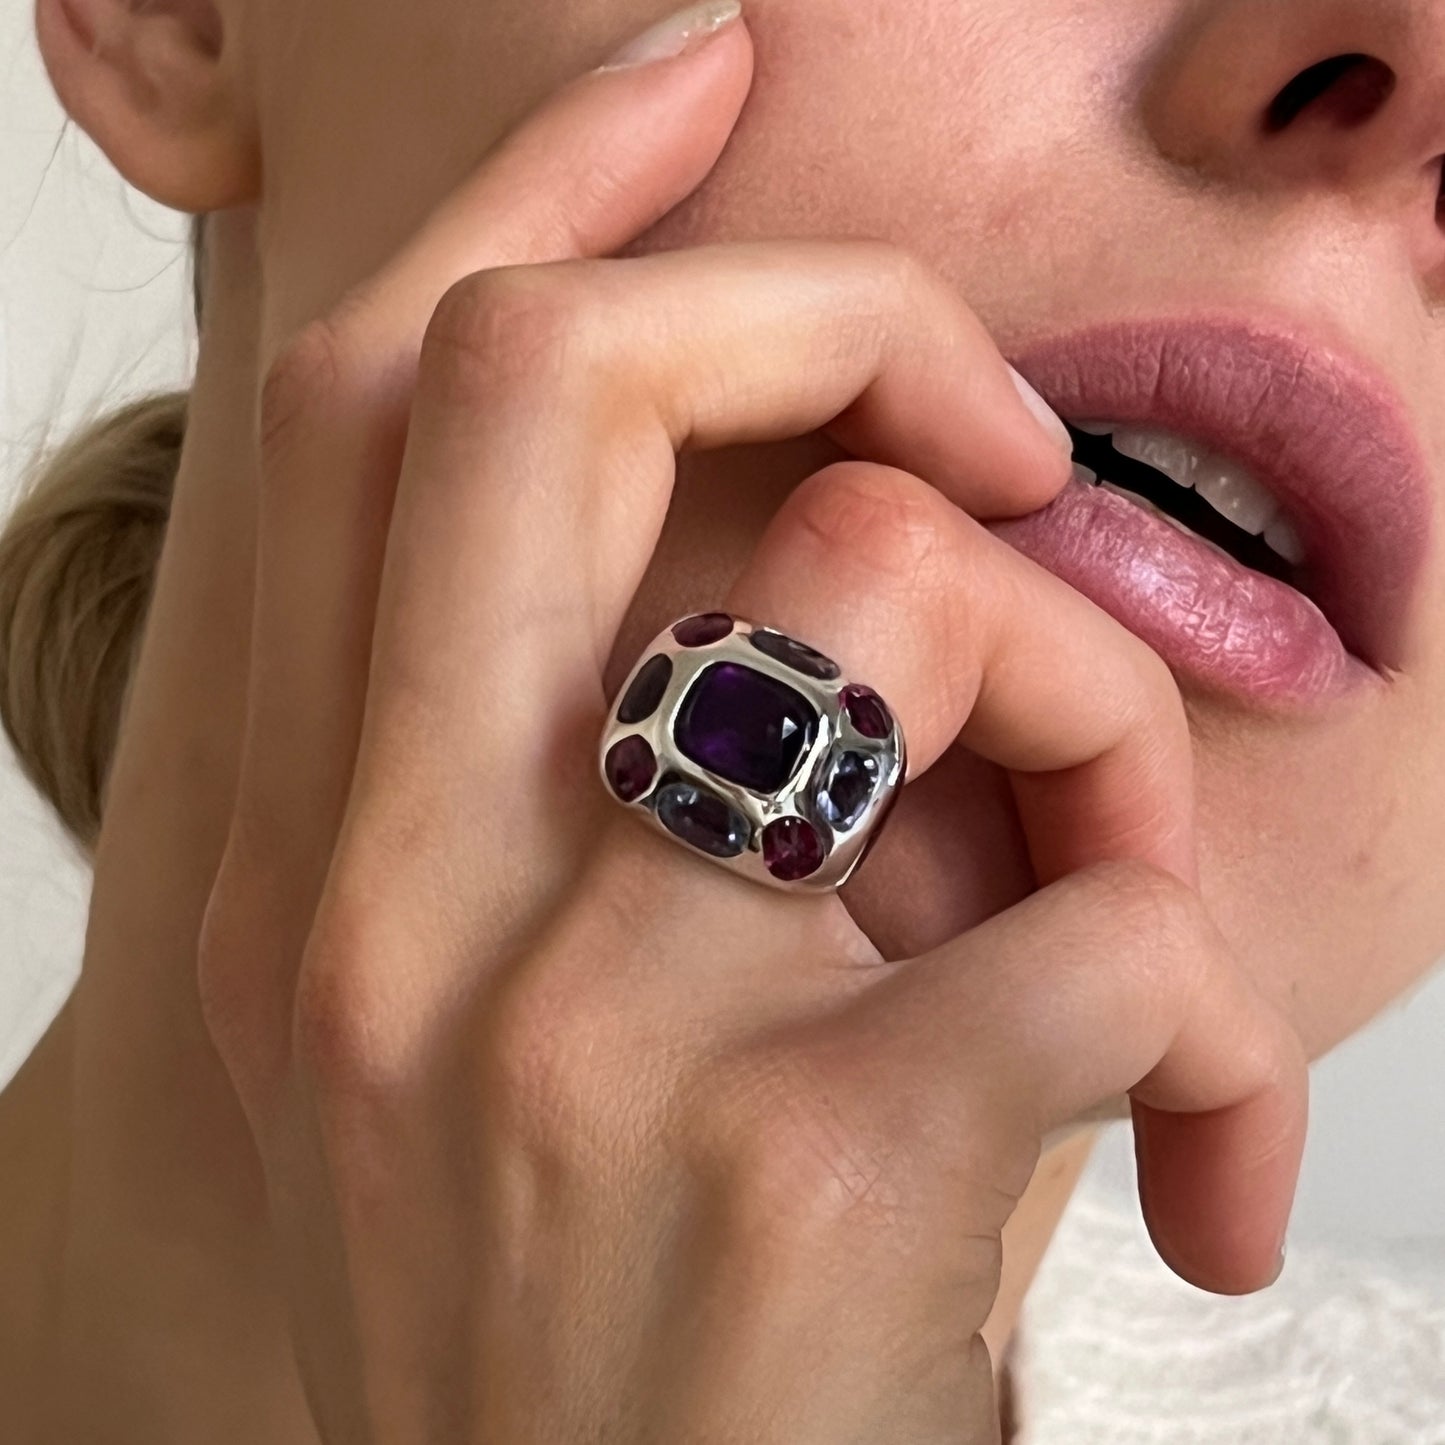 Chanel baroque "Coco Fruits Rouges" ring